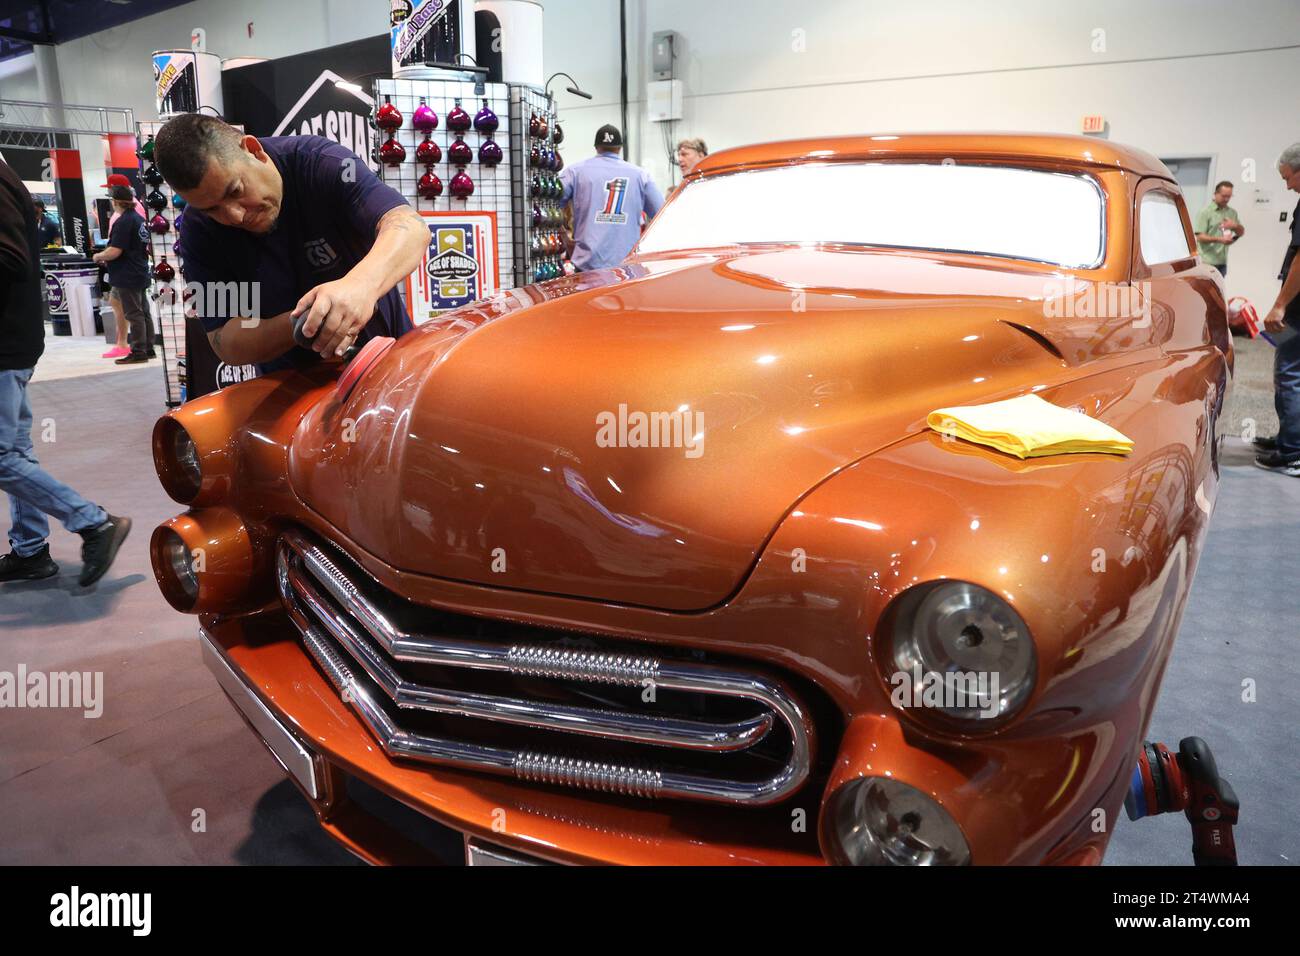 Las Vegas, United States. 01st Nov, 2023. An exhibitor is seen power waxing the Solar Scene II, a custom Mercury car built by legendary car builder Gene Winfield, on display during the 2023 SEMA Show, at the Las Vegas Convention center in Las Vegas, Nevada, Wednesday, November 1, 2023. This fully custom Mercury is fashioned after the original Gene Winfield Solar Scene built in 1963. Photo by James Atoa/UPI Credit: UPI/Alamy Live News Stock Photo